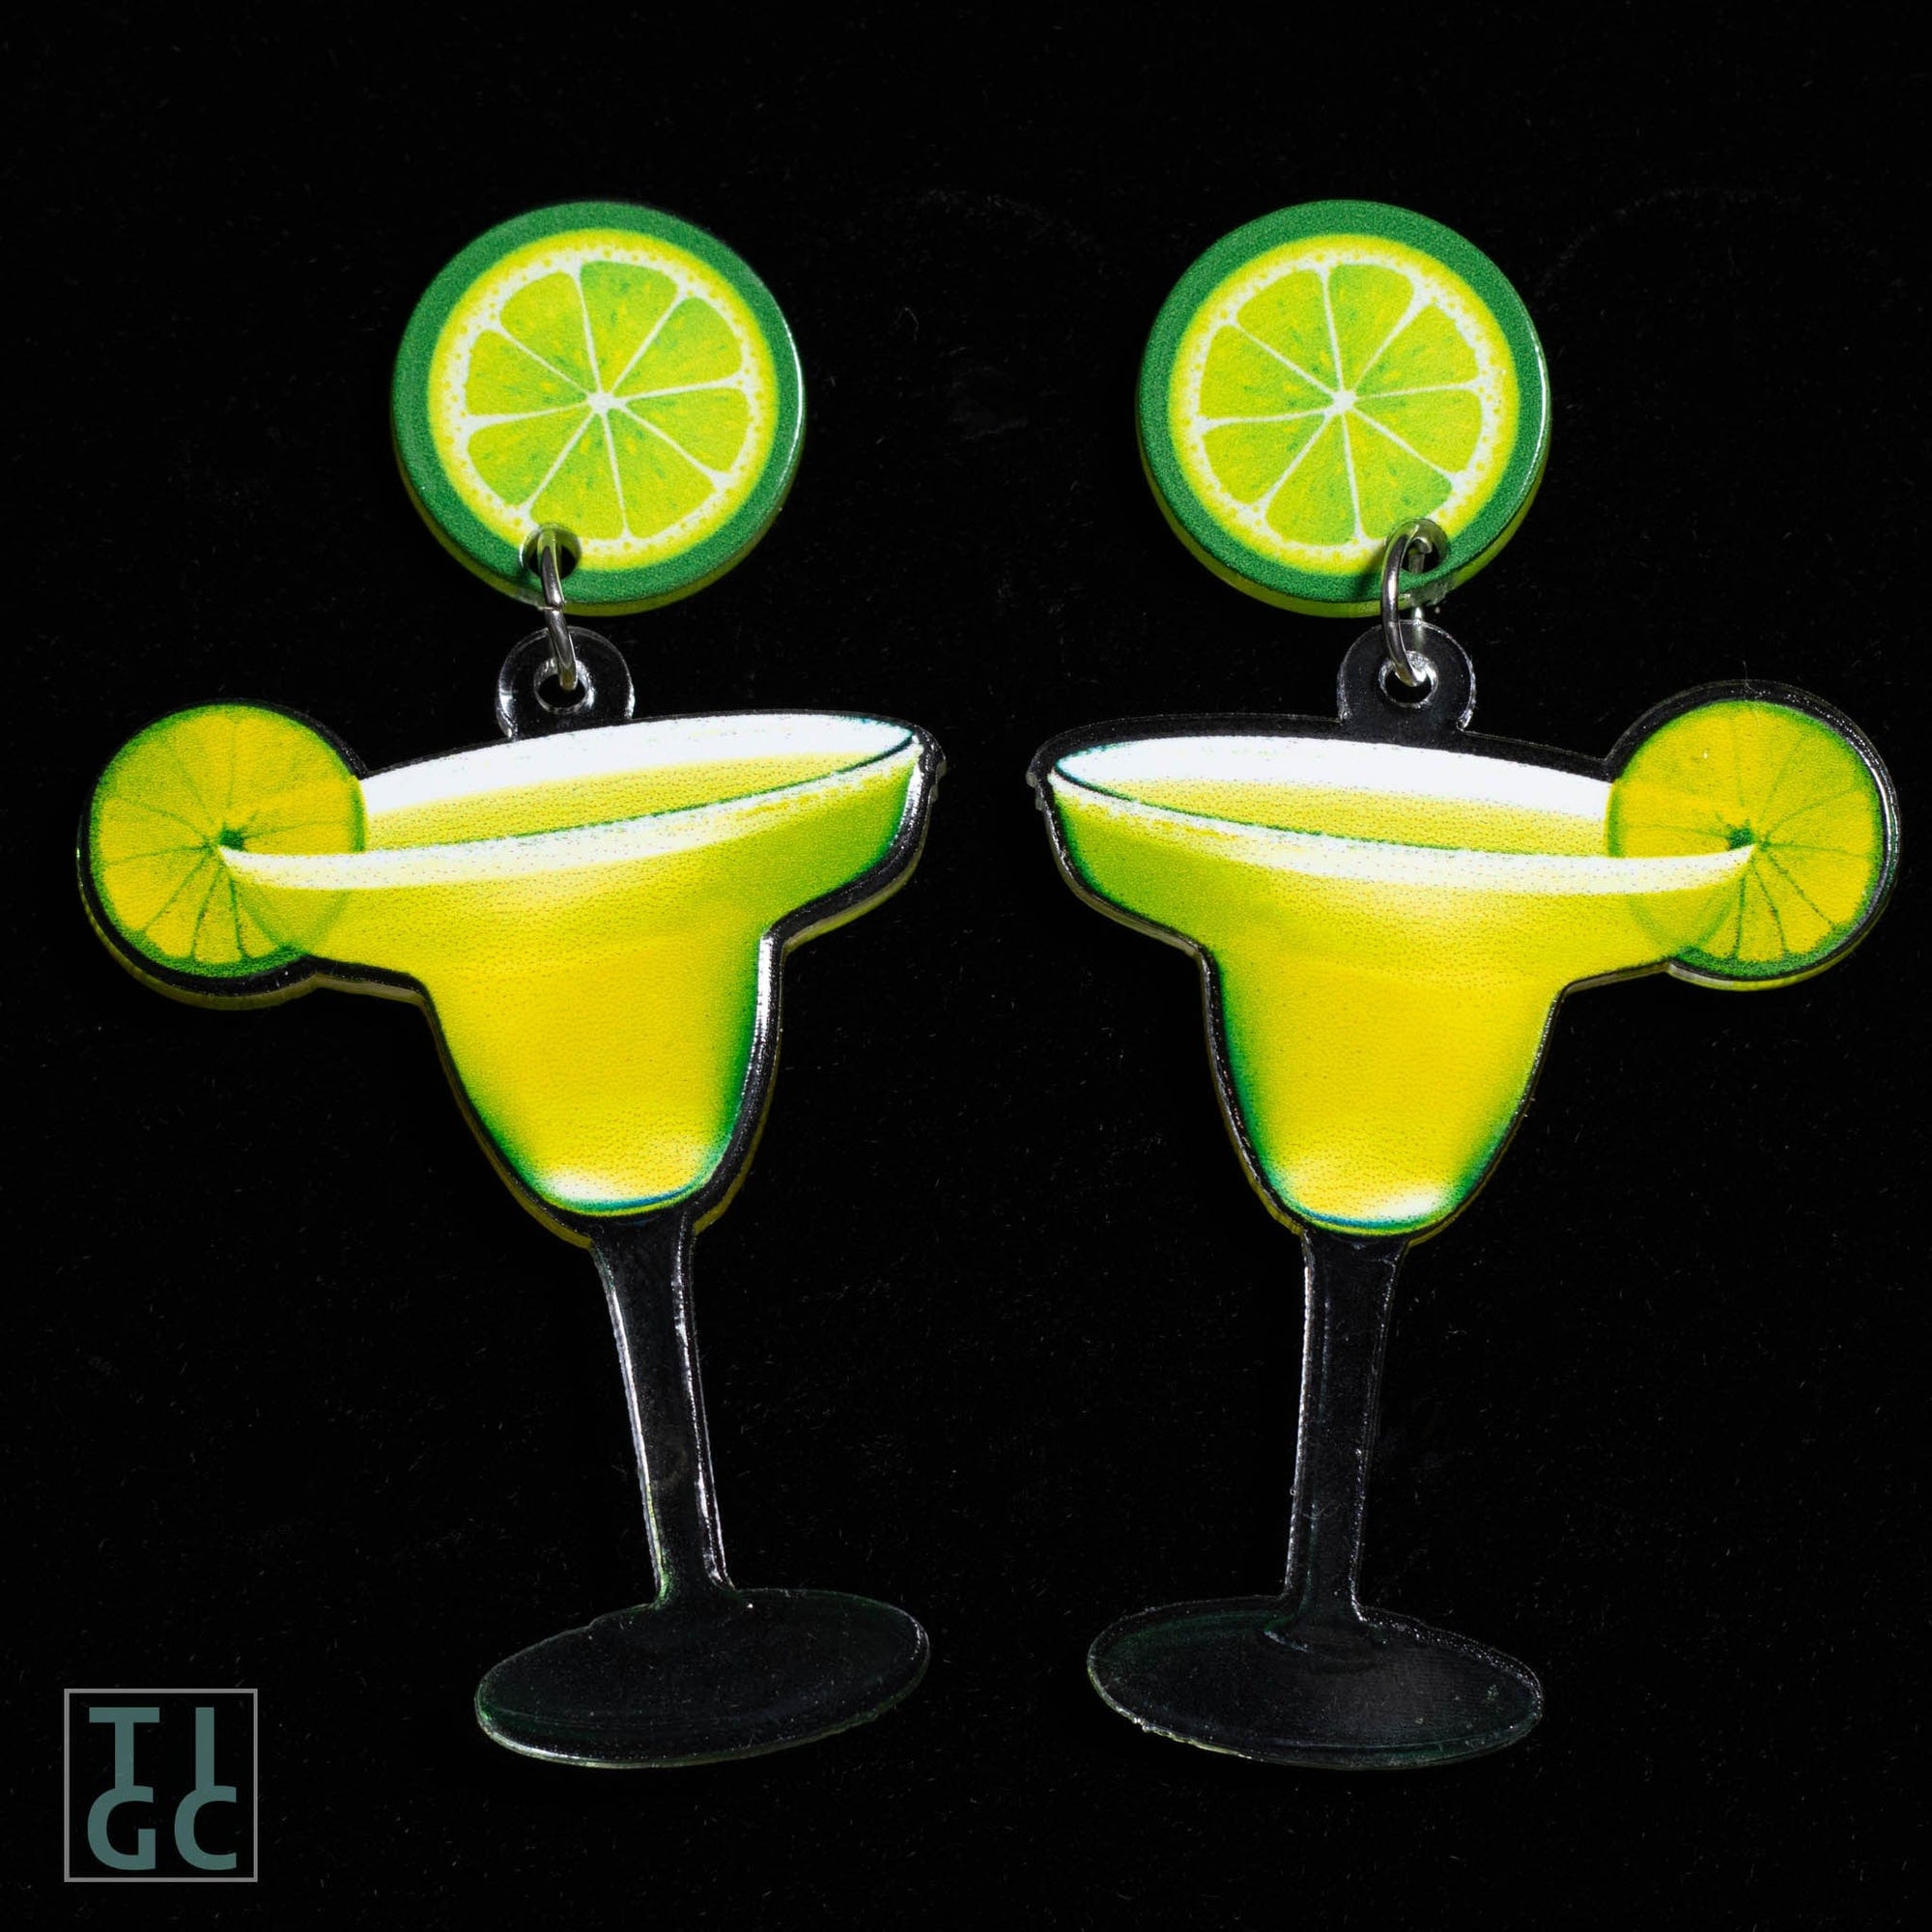 TIGC The Inappropriate Gift Co Cocktail Earrings - Margarita